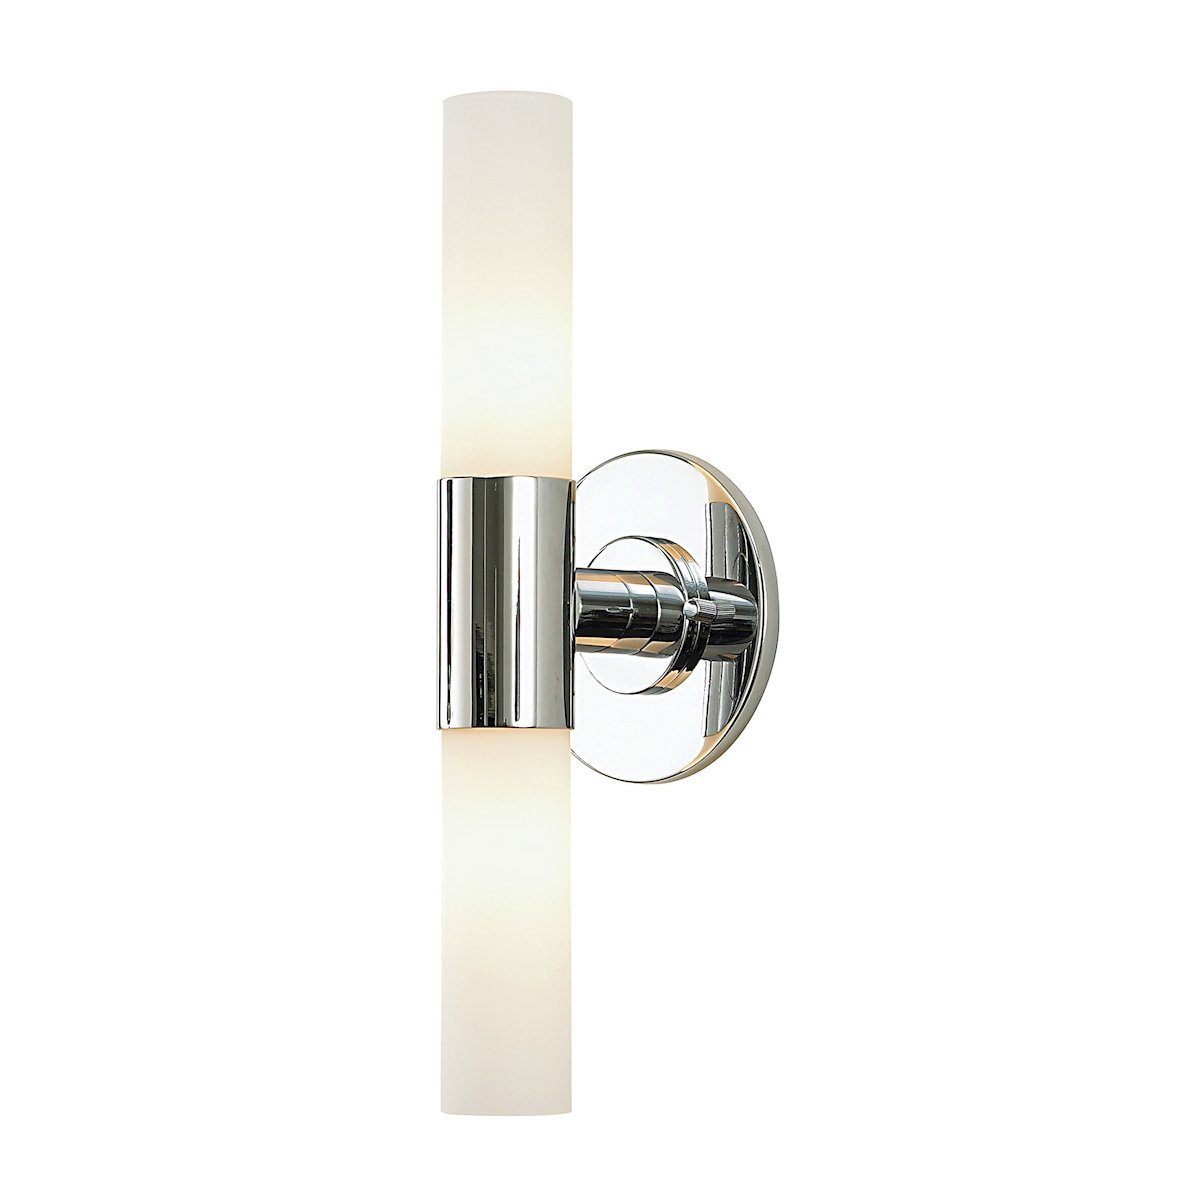 Double Cylinder 2 Light Vanity In Chrome And White Opal Glass Wall Elk Lighting 